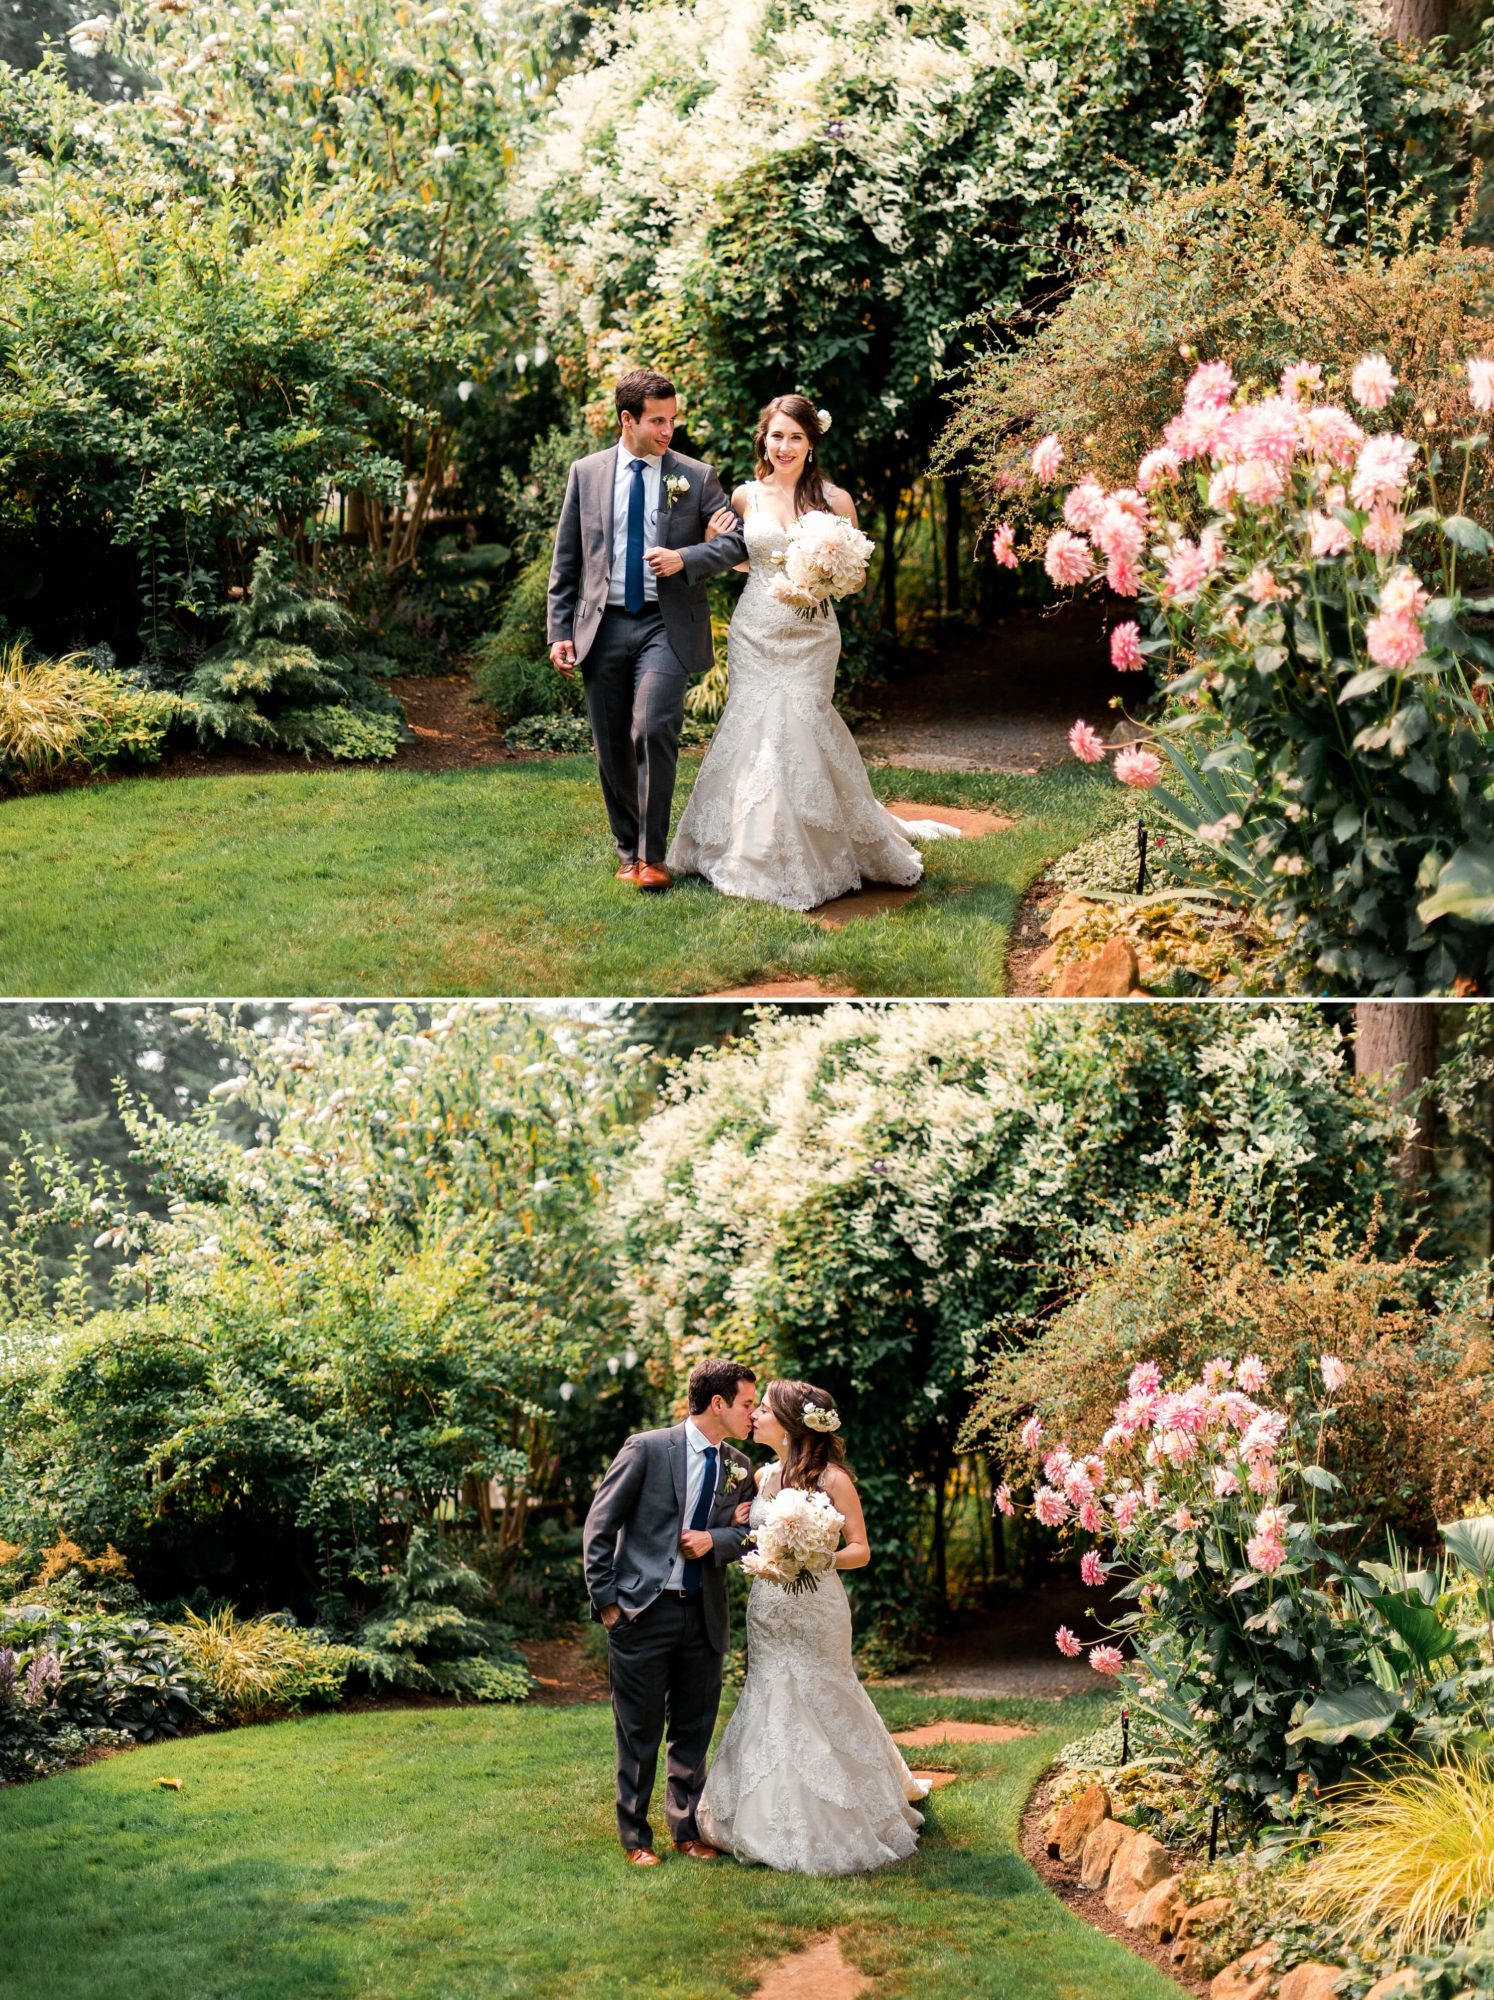 Bride and groom enjoying their marriage in the flower garden